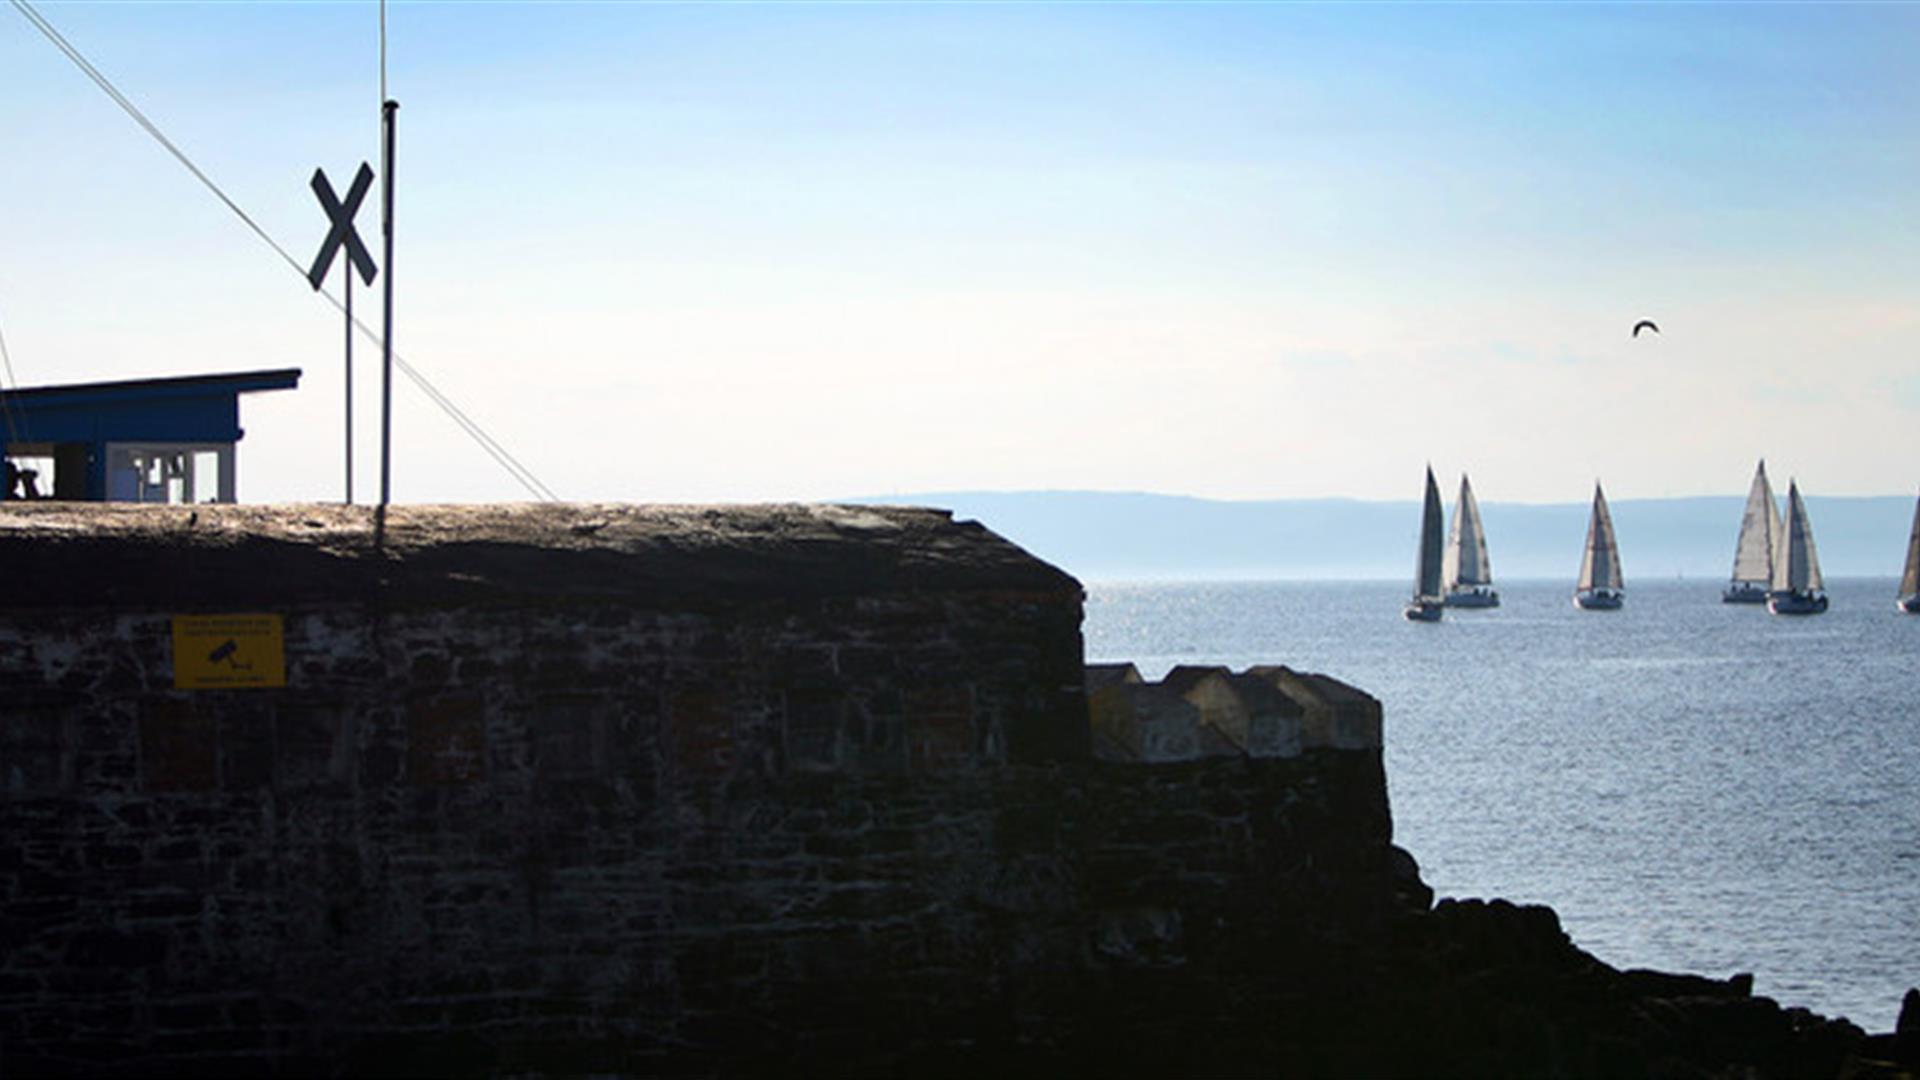 Photograph of yachts on the water of Belfast Lough from Kingsland showing